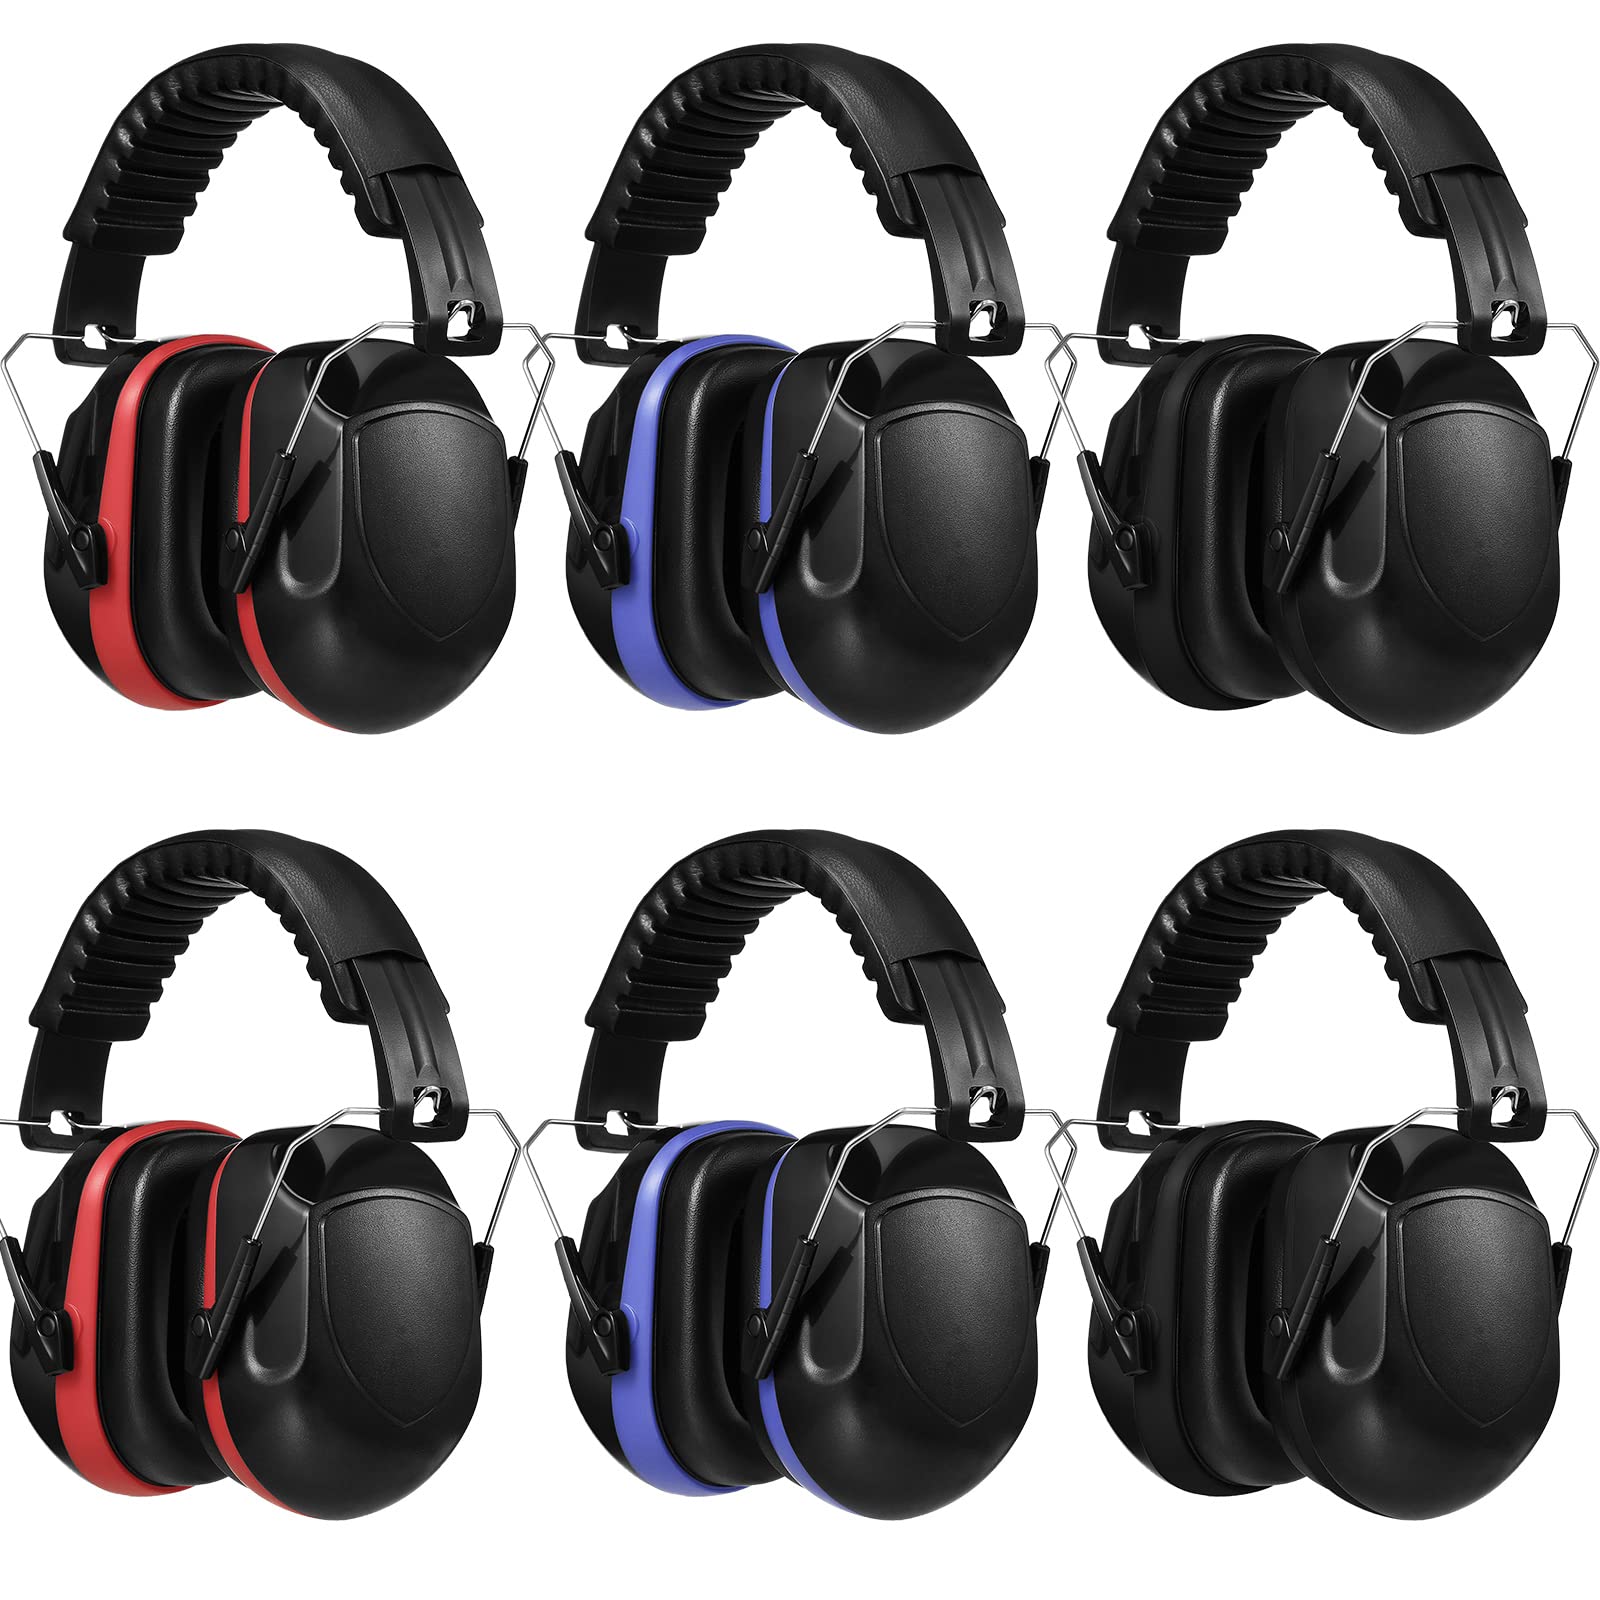 Yunsailing 6 Pcs Nrr 28db Ear Protection Lightweight Foldable Hearing Protection Ear Muffs for Noise Reduction Soundproof